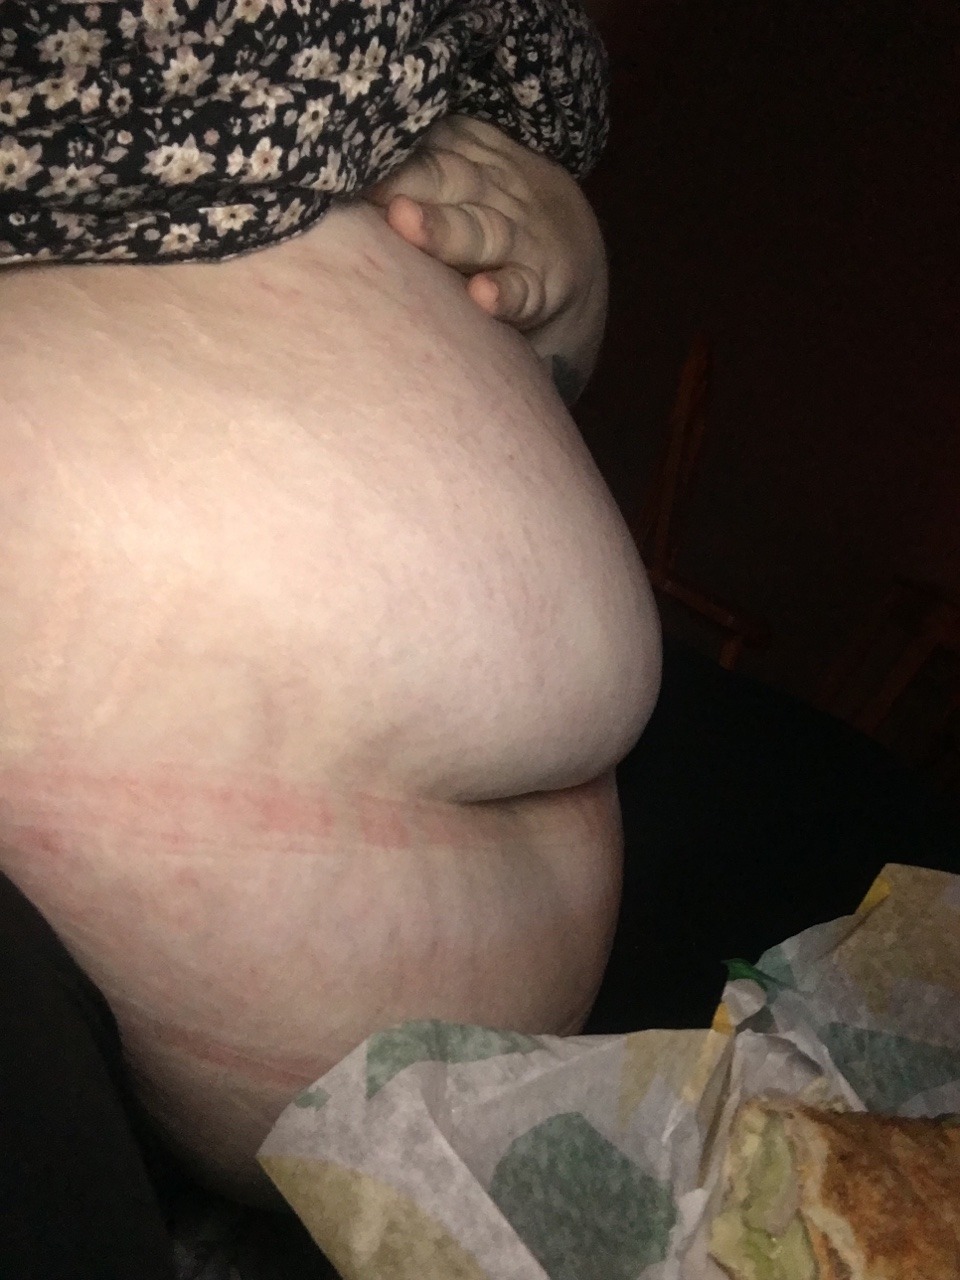 growingcutie: Hanging so low lately! Had to free my belly while stuffing because